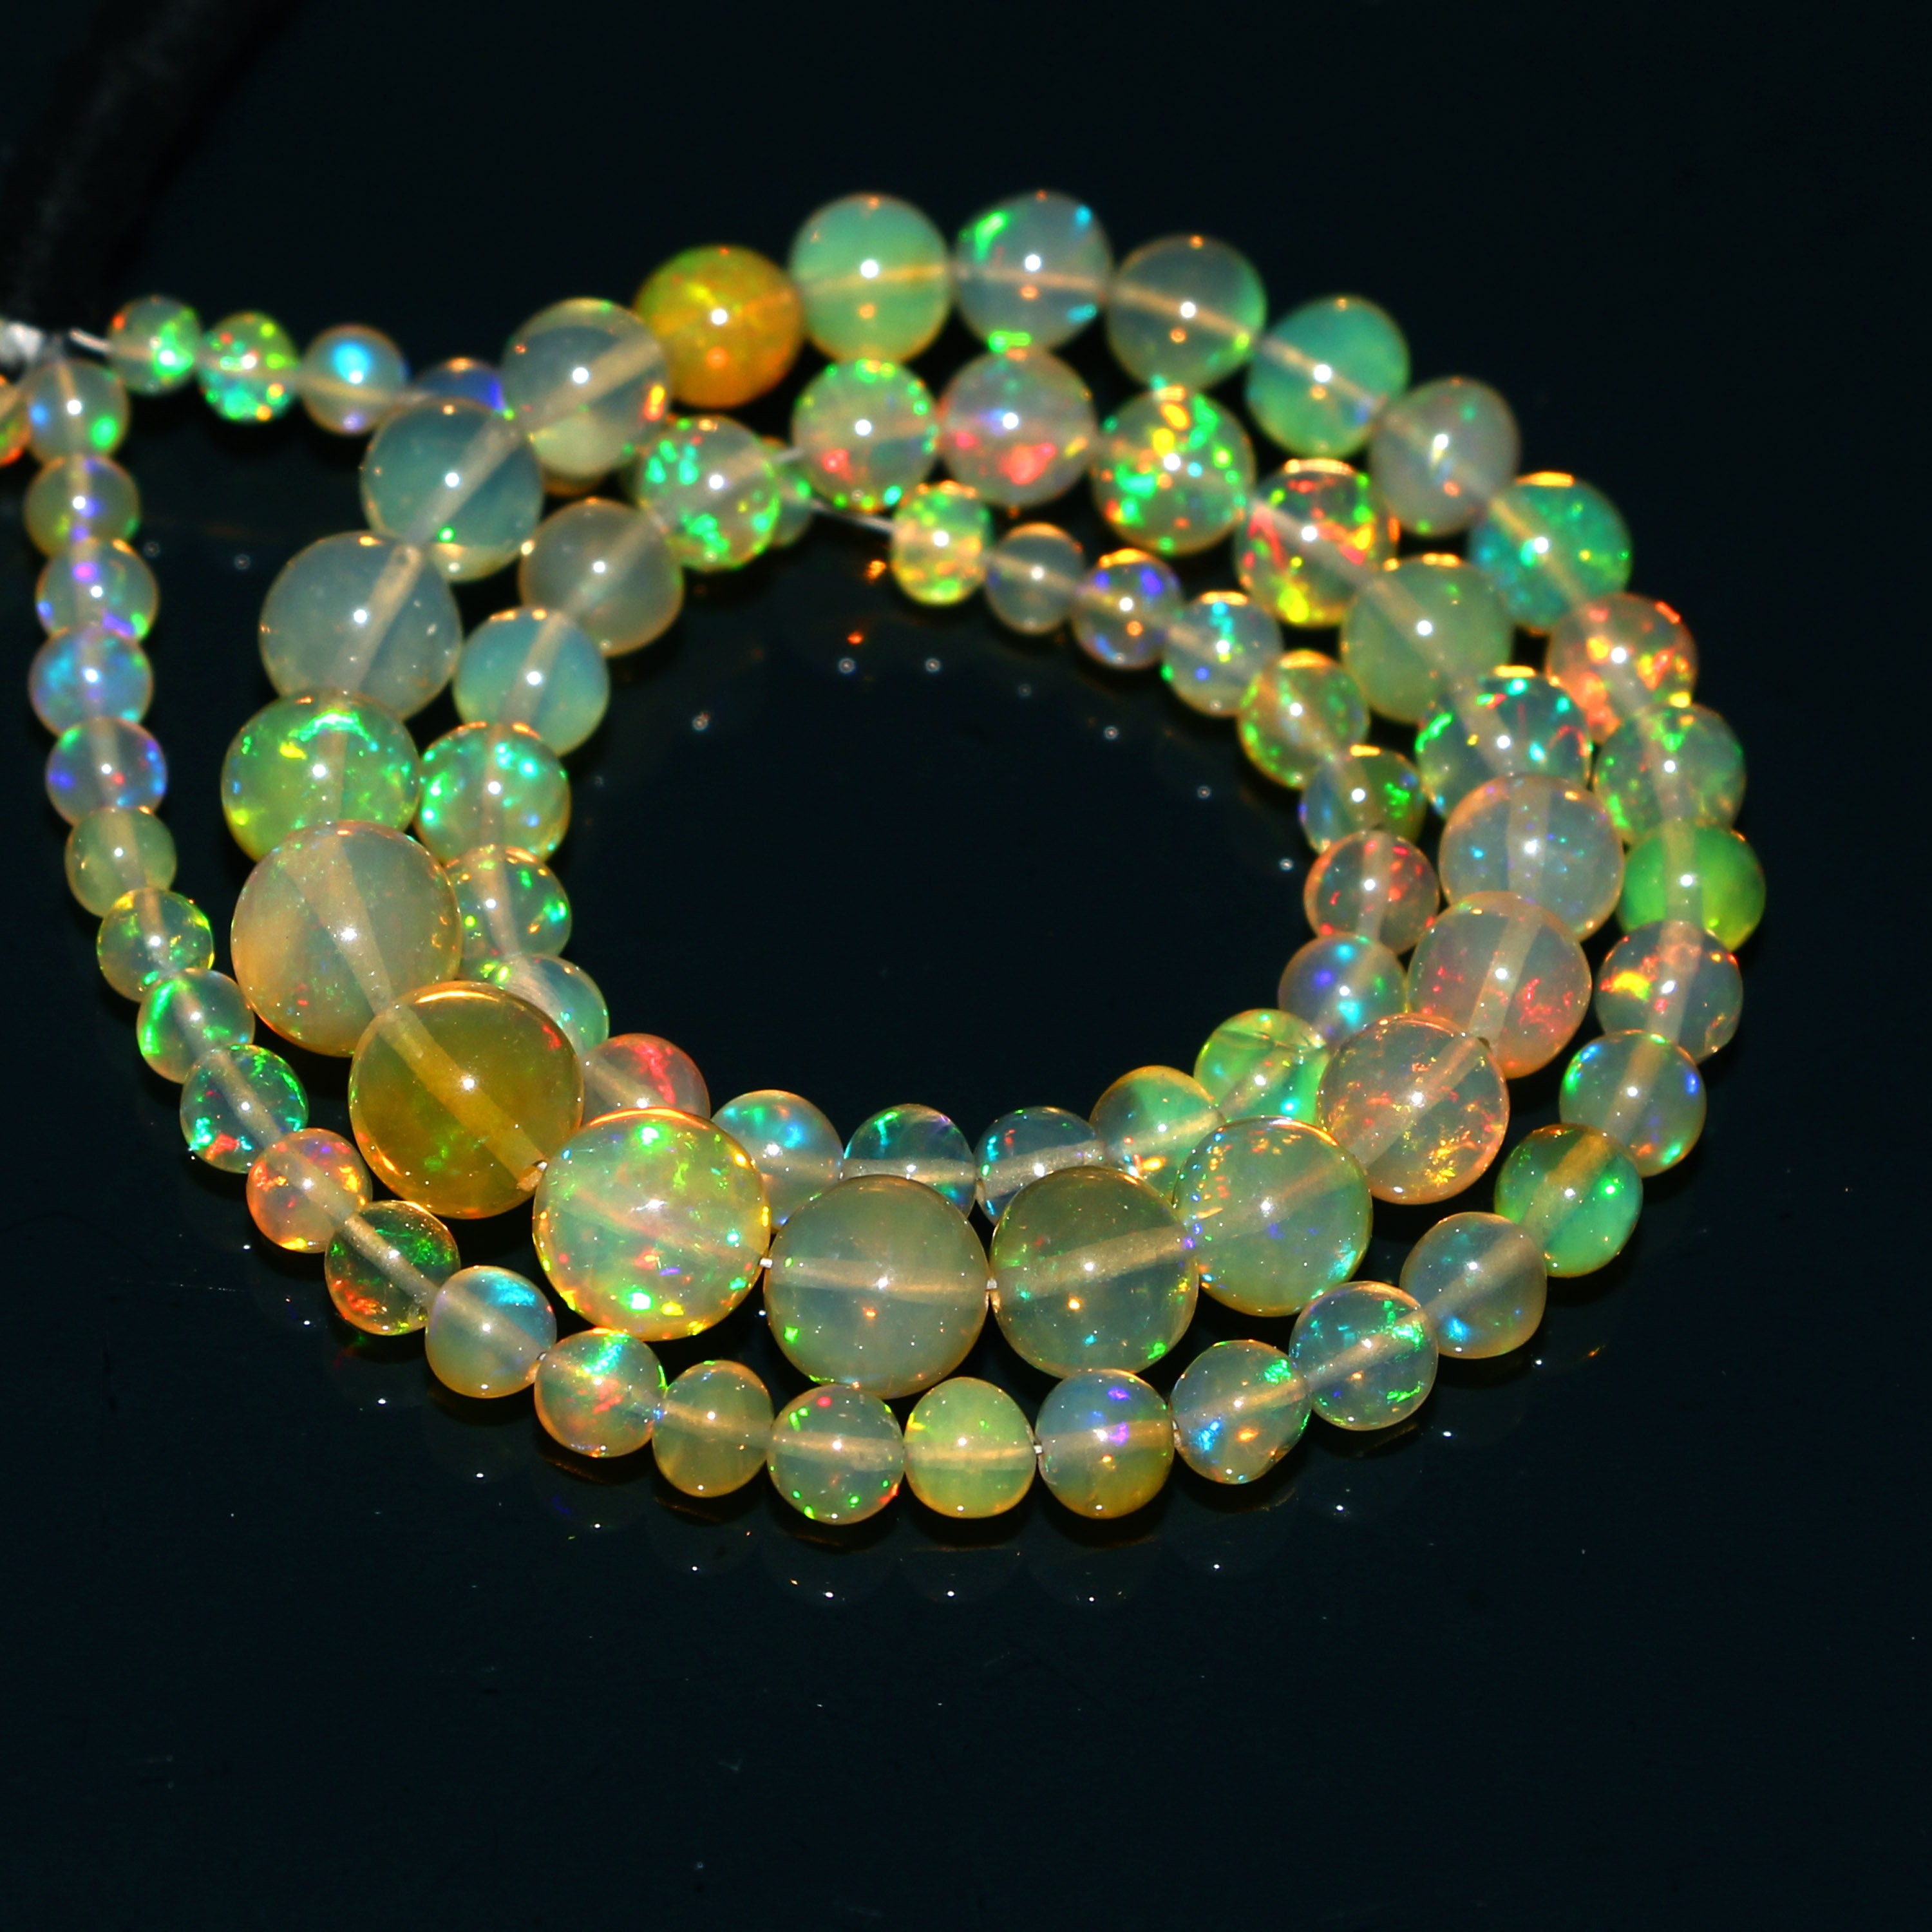 Size 3.5-6 MM Approx Opal For Jewelry Making. Top Quality Natural Welo Fire Ethiopian Opal Smooth Rondelle Beads Necklace Opal Gemstone